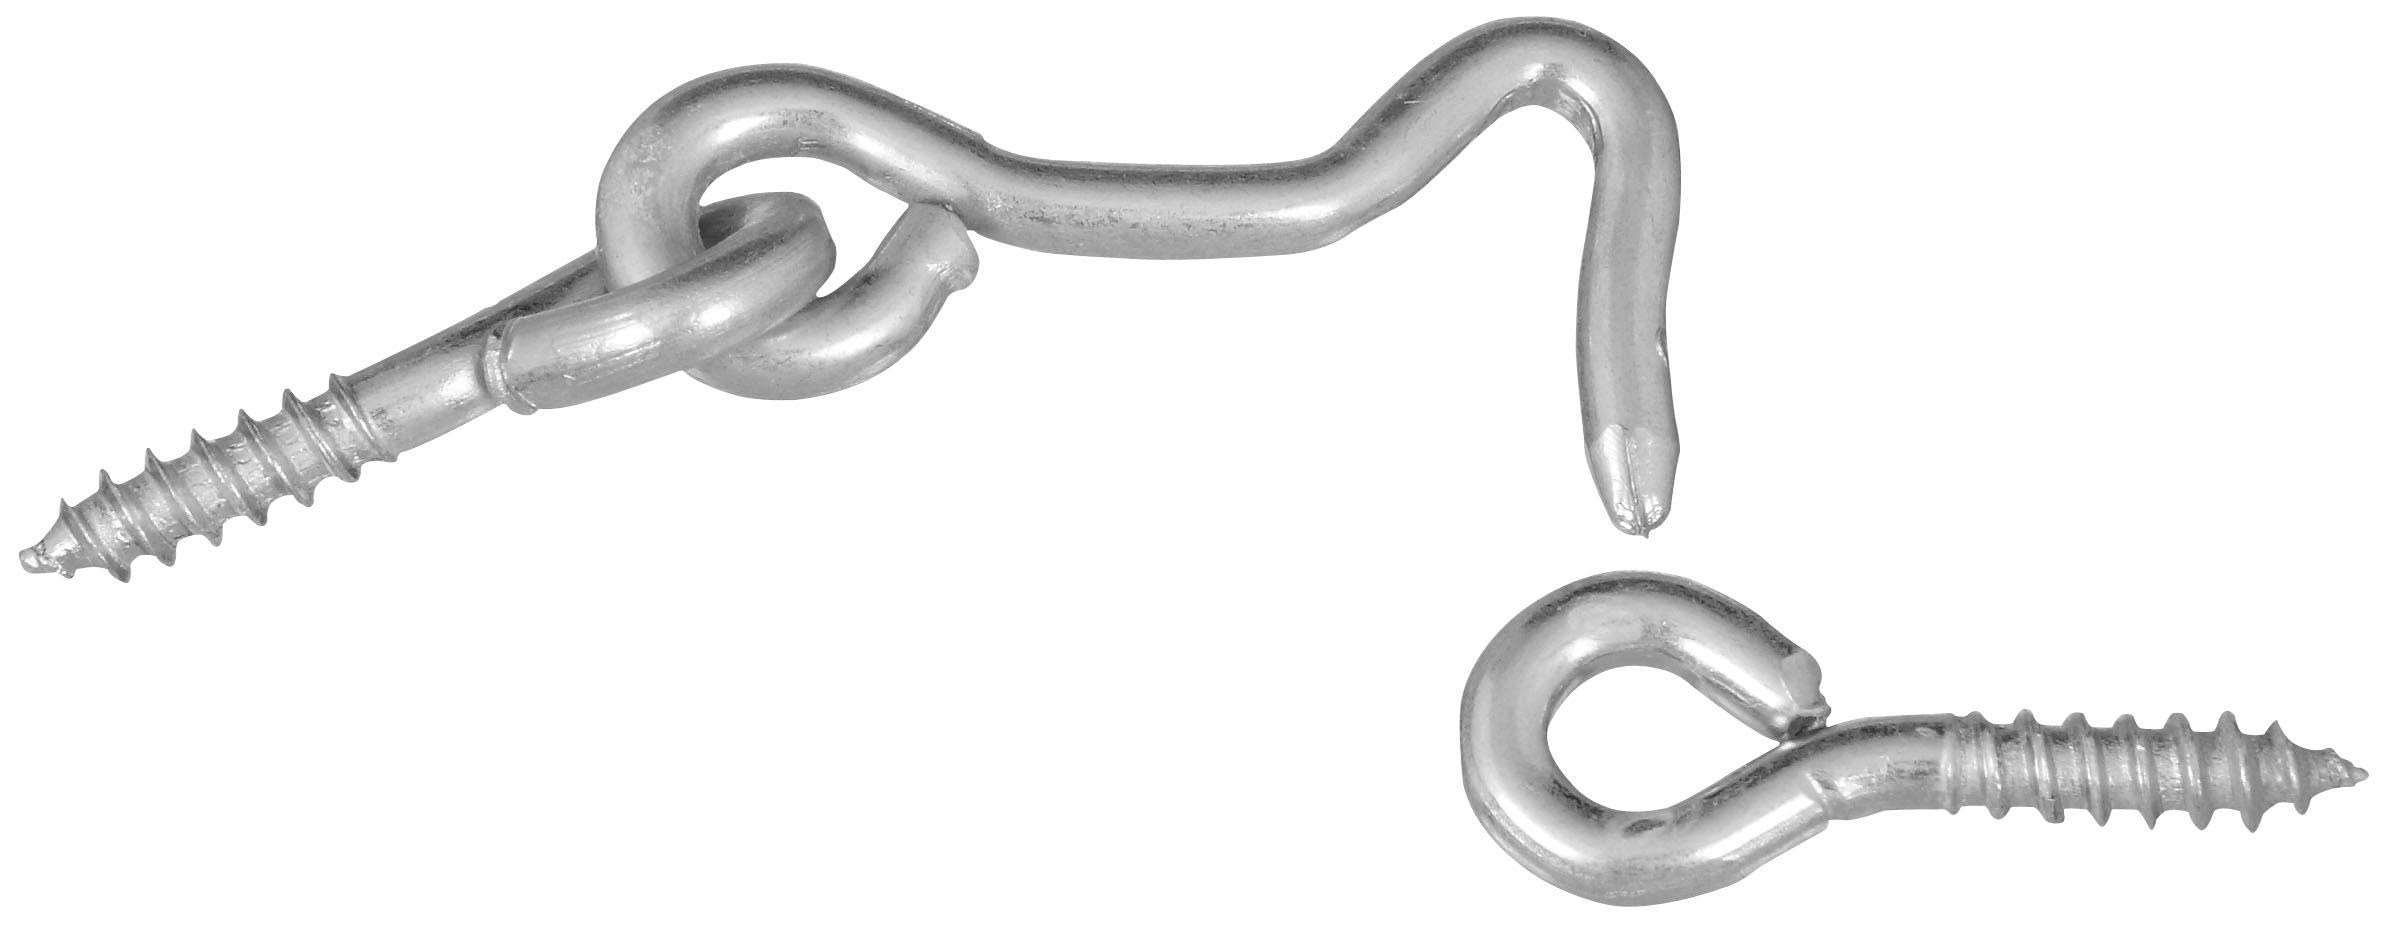 National Hardware Steel Hook and Eye - 1 1/2", Zinc Plated